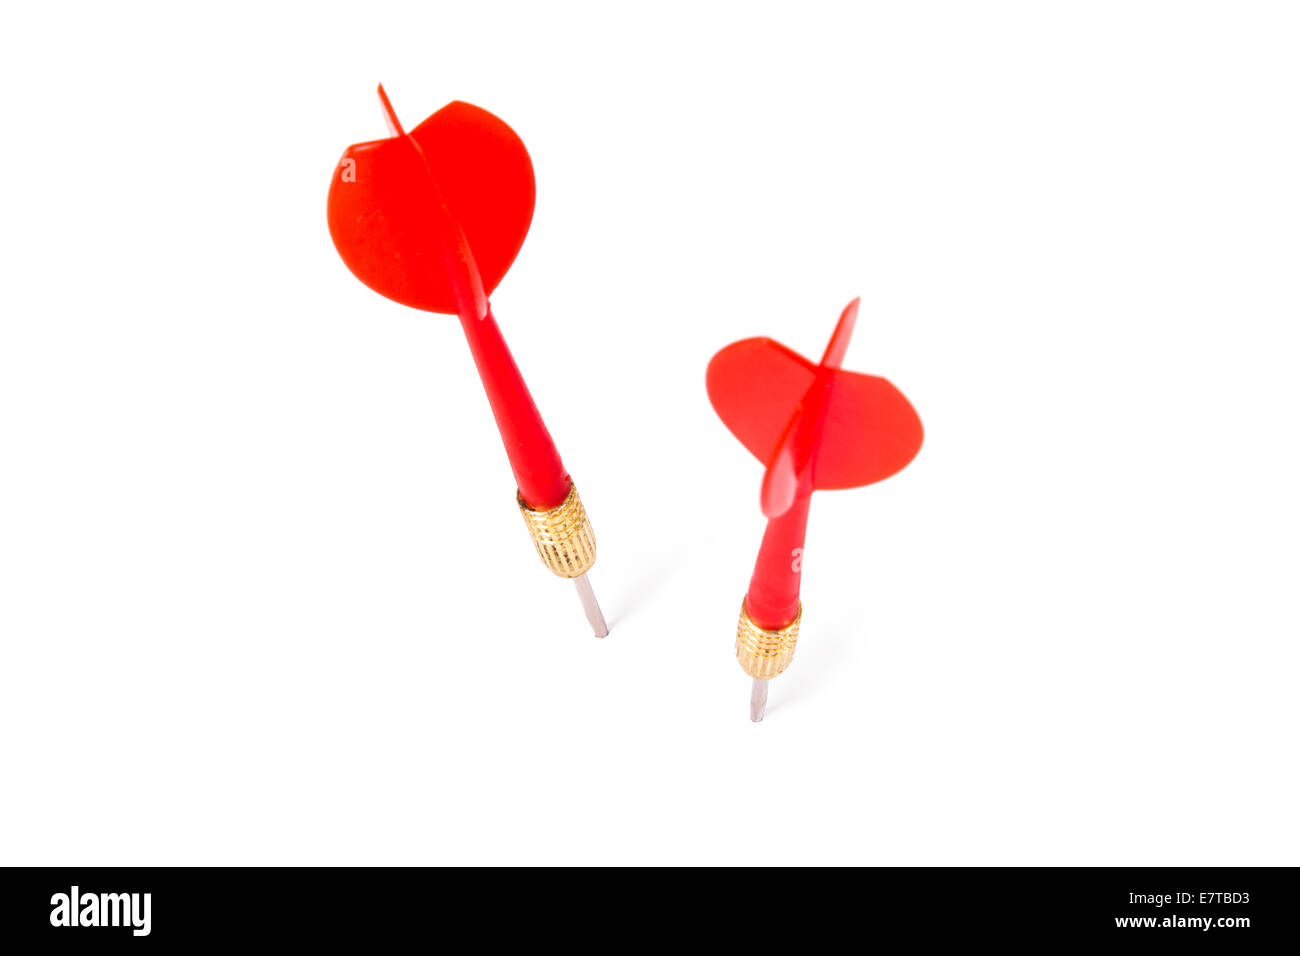 Plastic, red dart arrows, isolated on white background. Stock Photo